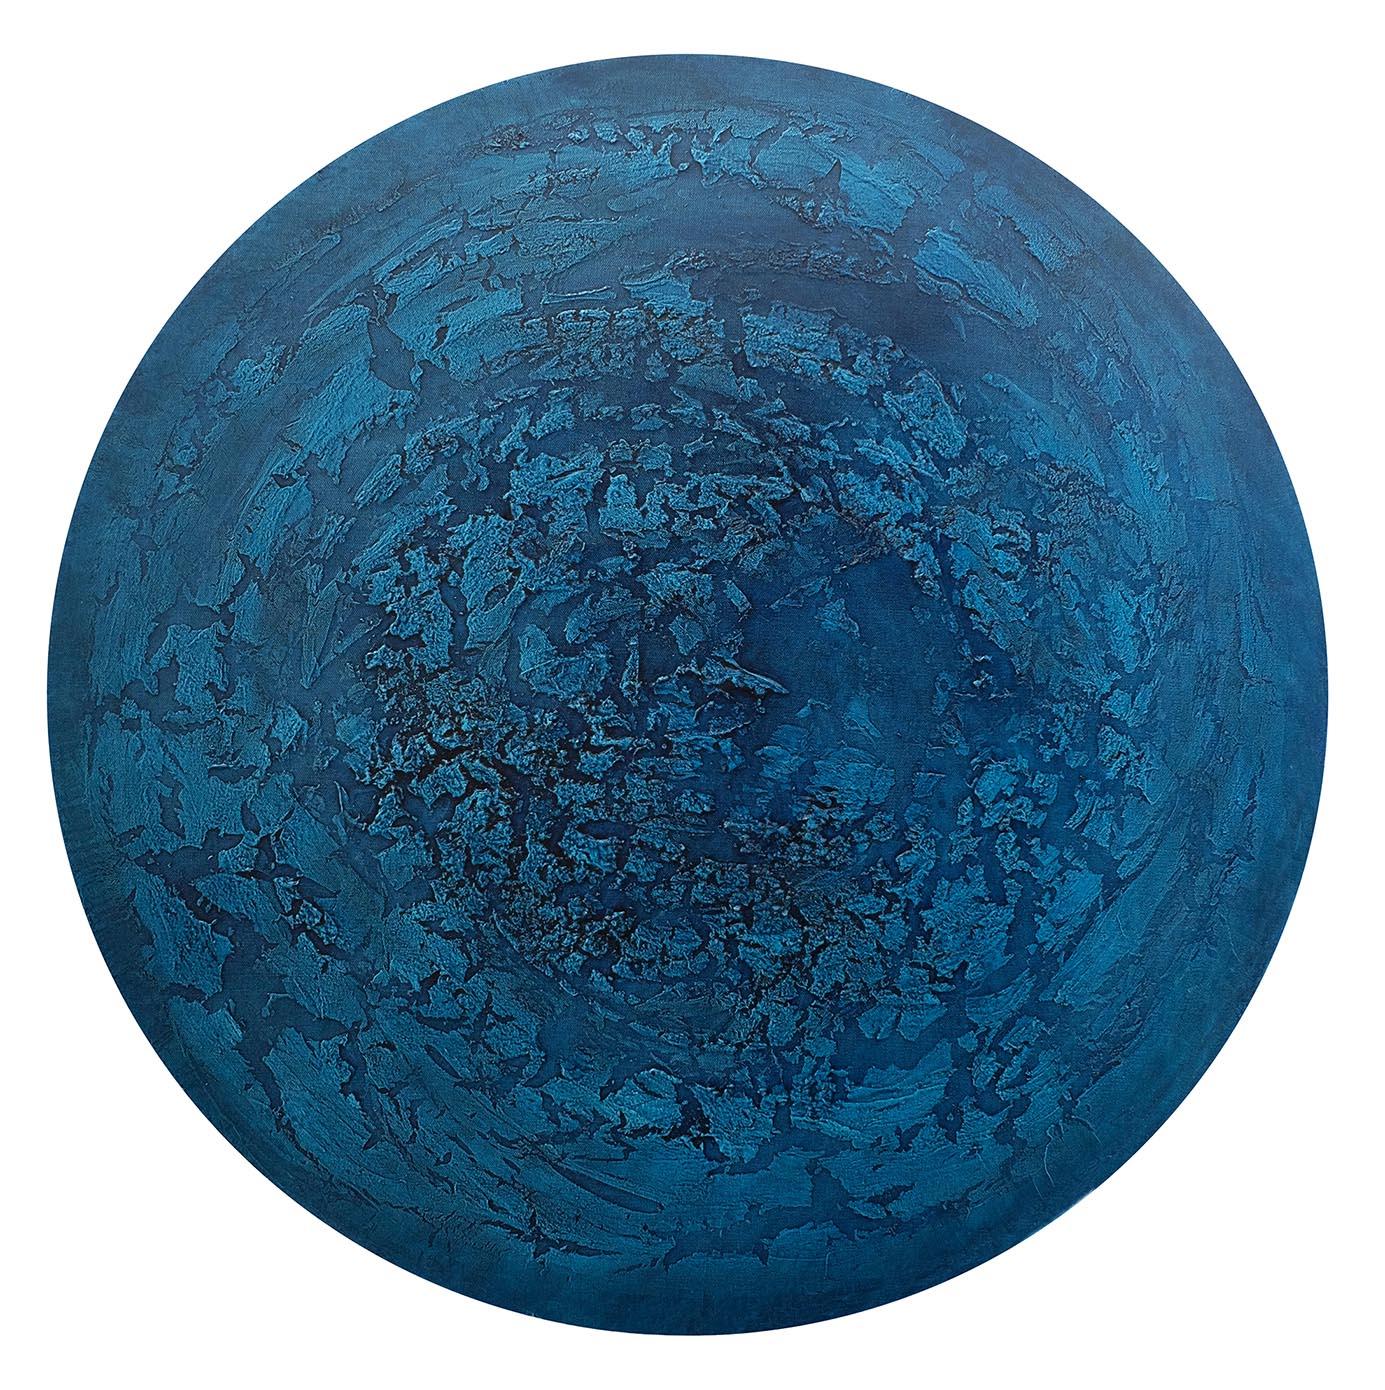 CN 6 - Oil Painting, inspired by surface structure of planets and the moon - Art by Jonathan Moss